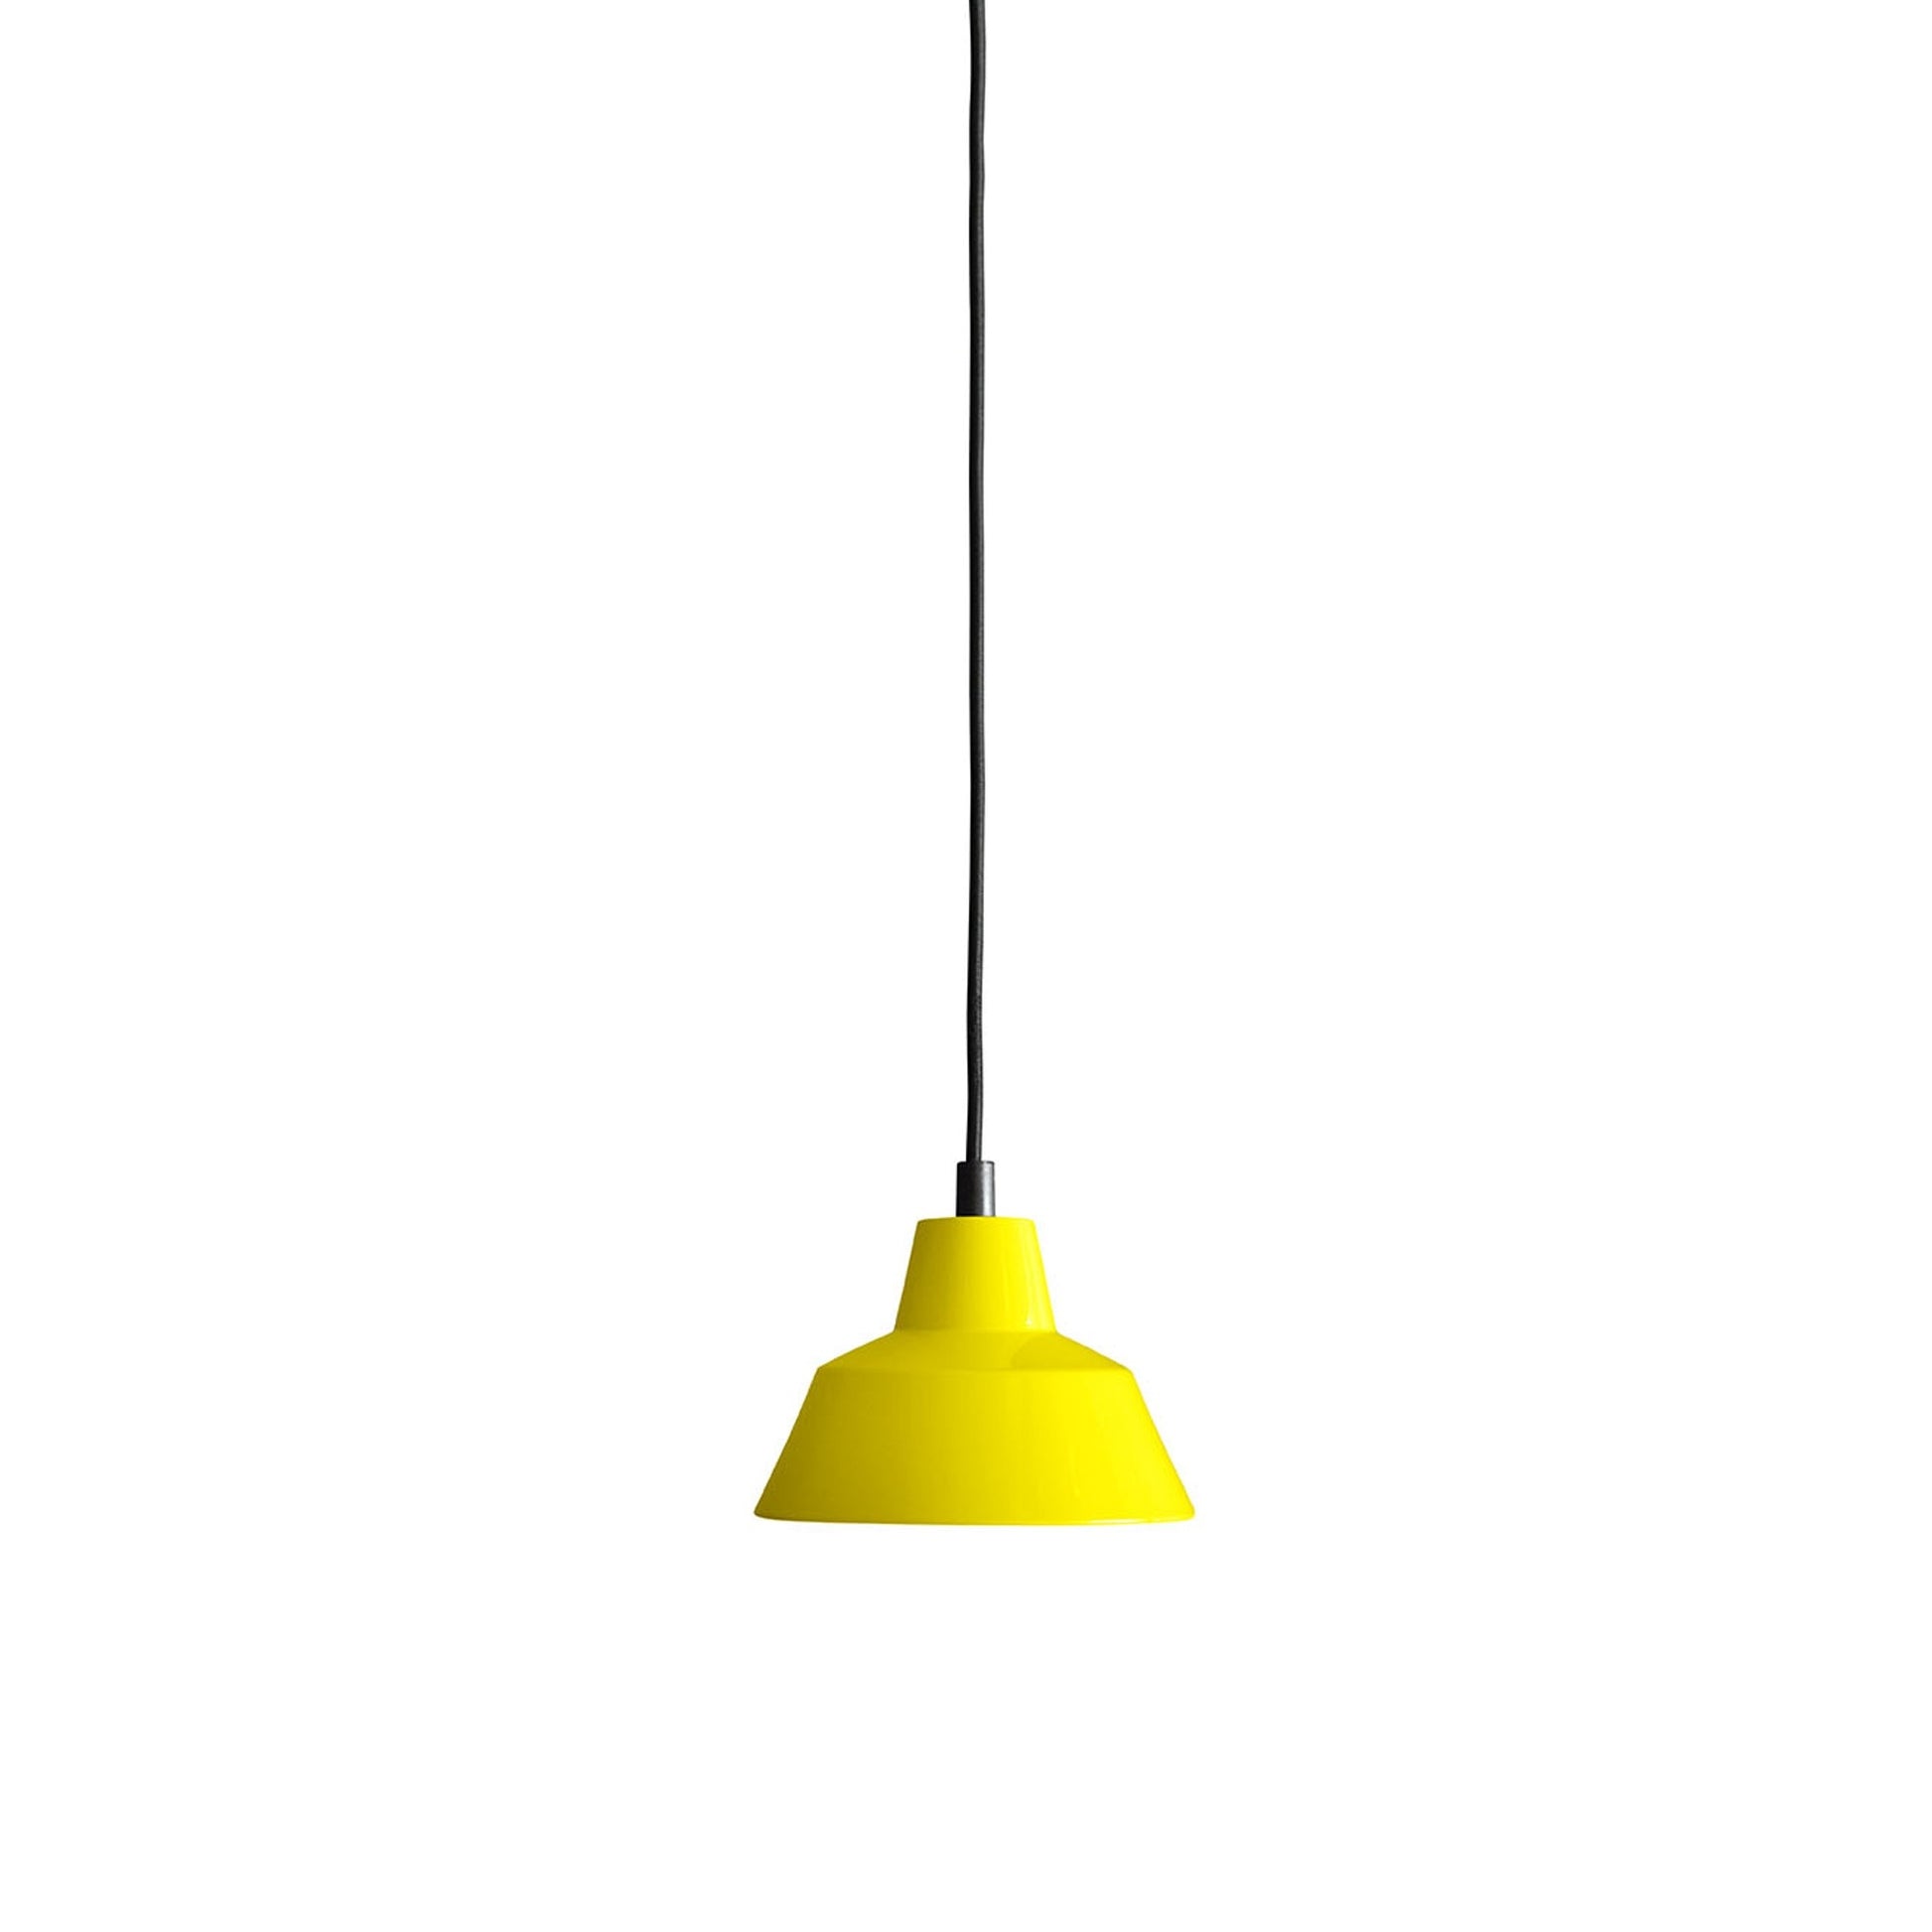 Workshop Lamp Pendant Lamp W1 by Made By Hand #Yellow